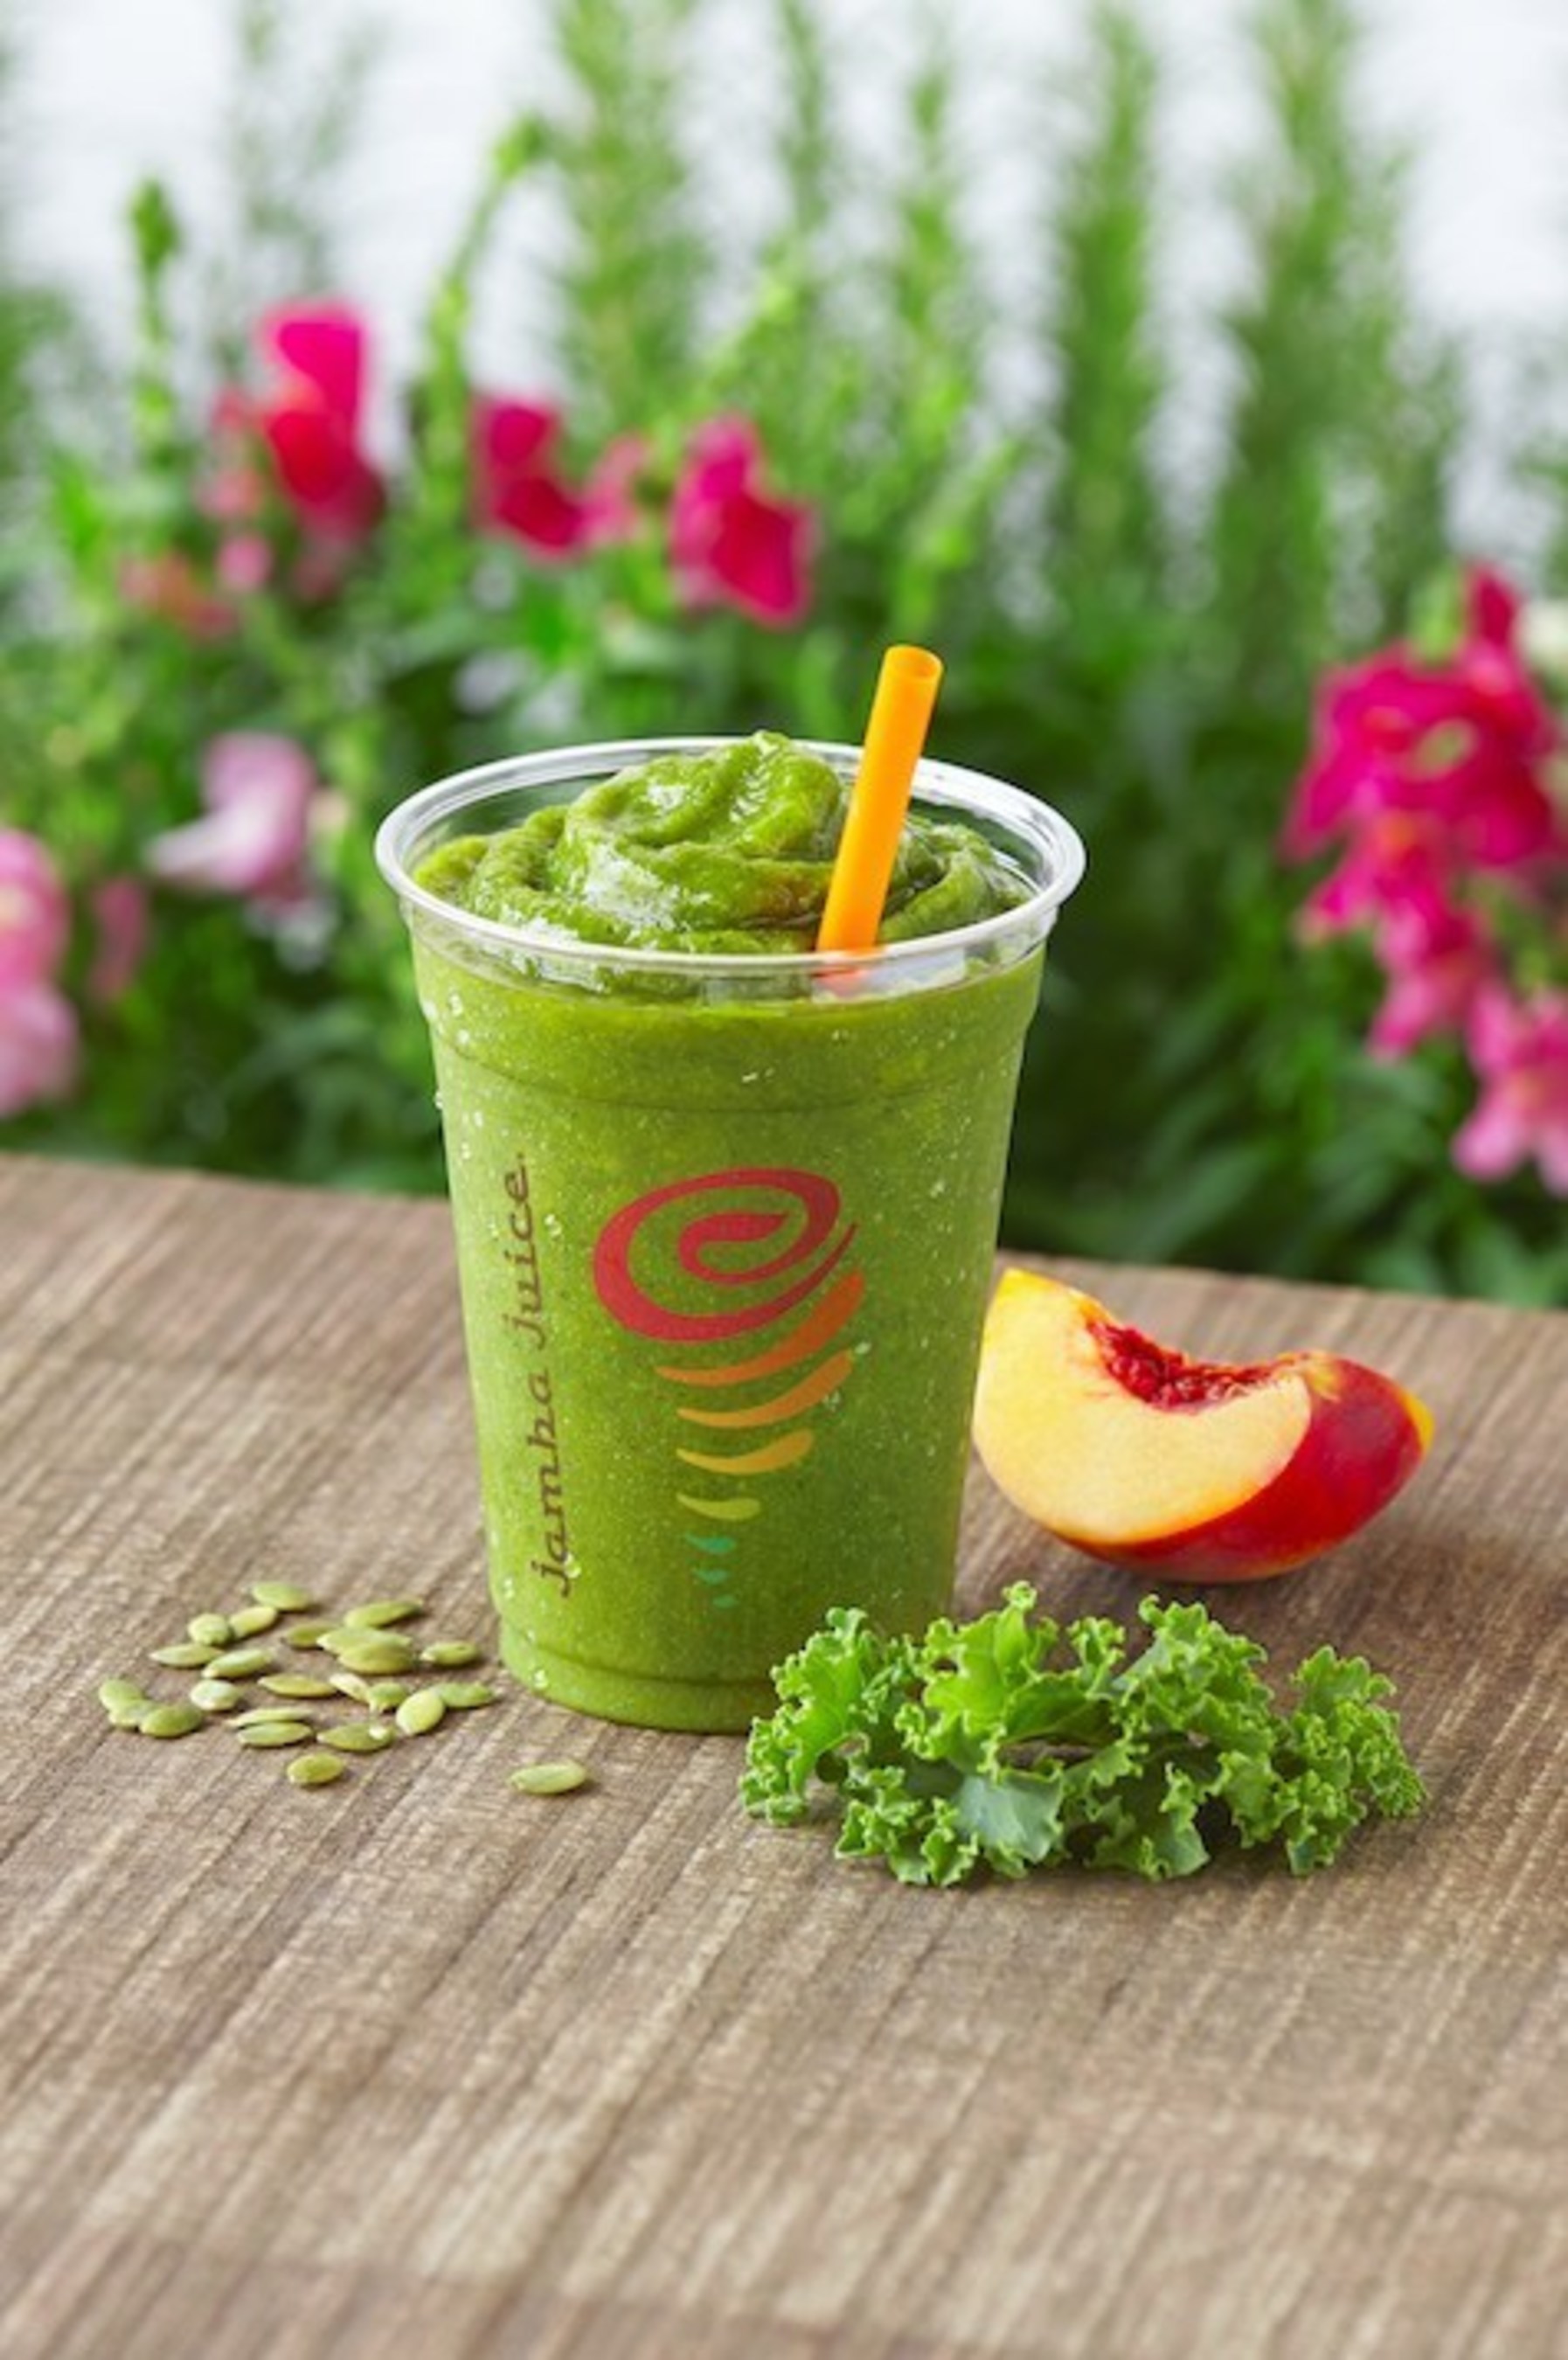 New Jamba Juice Amazing Greens(TM): A tasty blend of kale, lemon, peach juice, peaches, bananas, and pumpkin seeds that delivers at least 11g of protein, 2.5 servings of fruit, and 1 serving of vegetables to help power your day. An excellent source of Folate, Vitamin K, Vitamin A, Vitamin C, and Manganese. Amazing Greens(TM) joins Kale-ribbean Breeze(TM), Carrot Orange Fusion(TM), and PB Chocolate Love(TM) in the Whole Food Nutrition line, offering consumers nutritious and satisfying smoothies to provide a delicious, on-the-go snack.